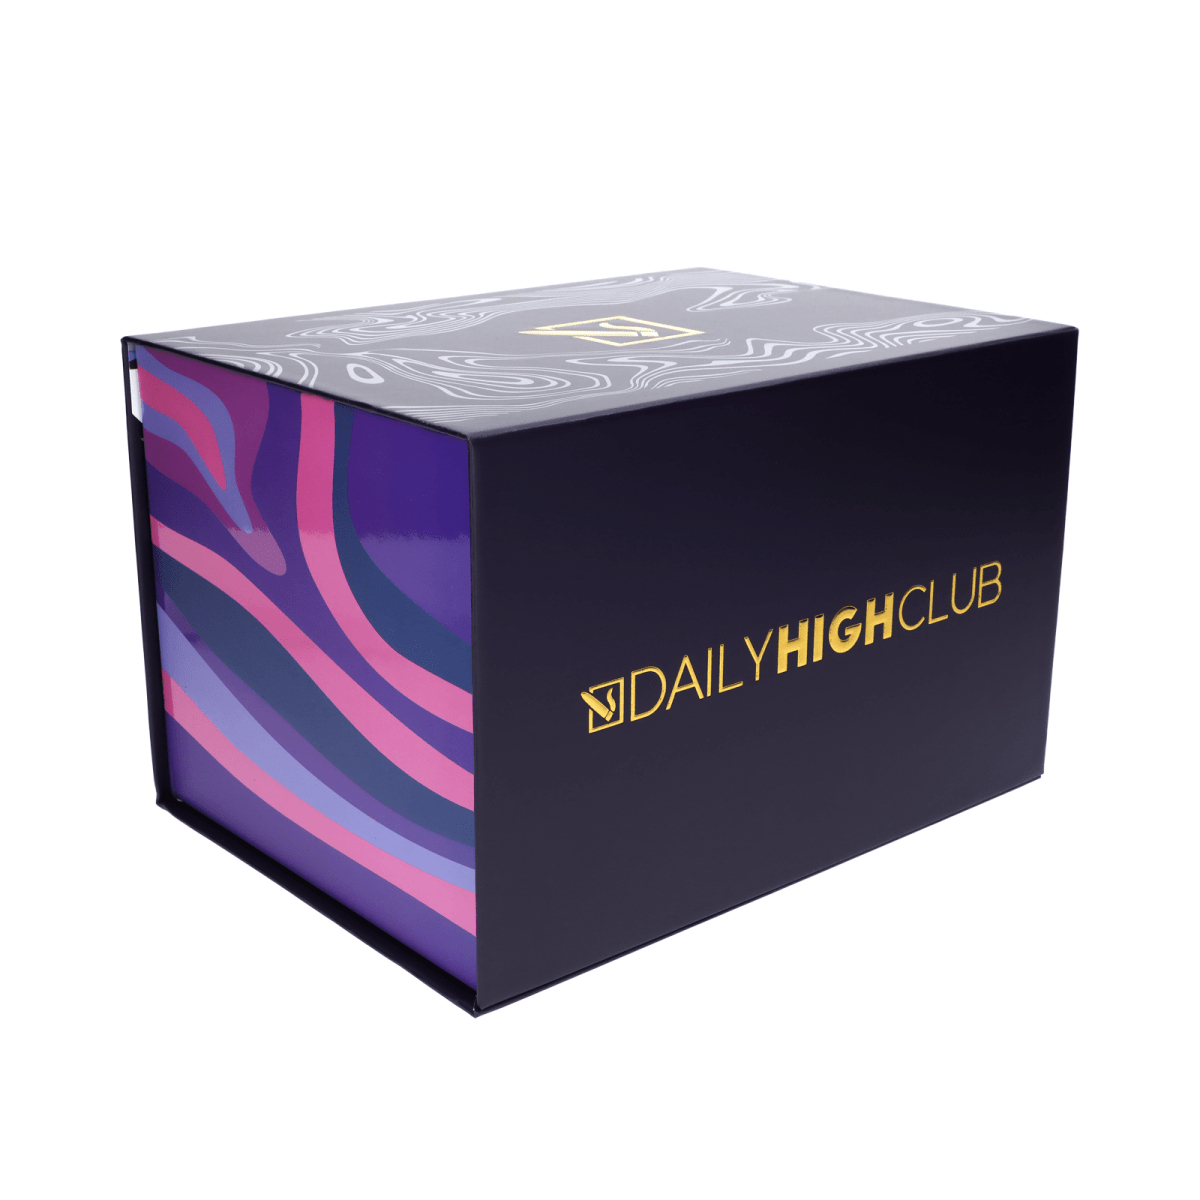 Daily High Club Box Limited Edition 420 Bunny Deluxe Box